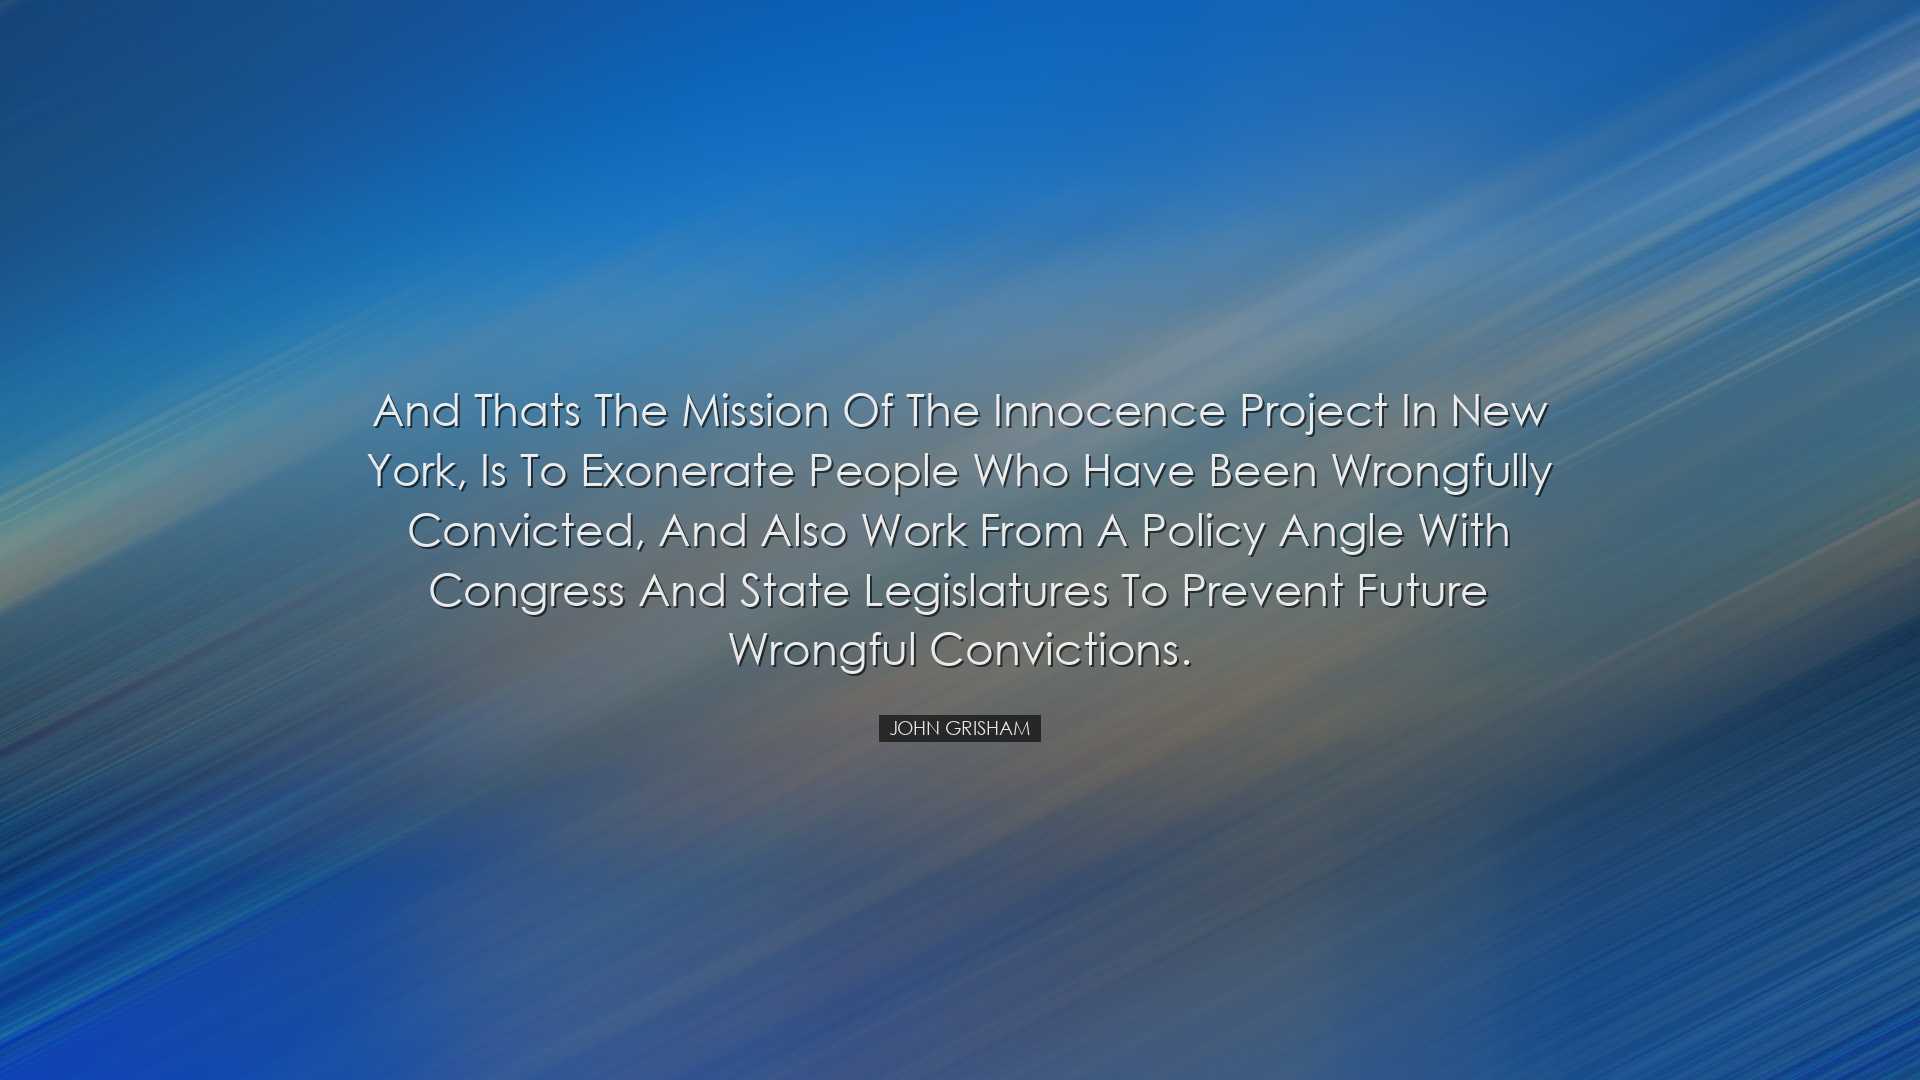 And thats the mission of The Innocence Project in New York, is to